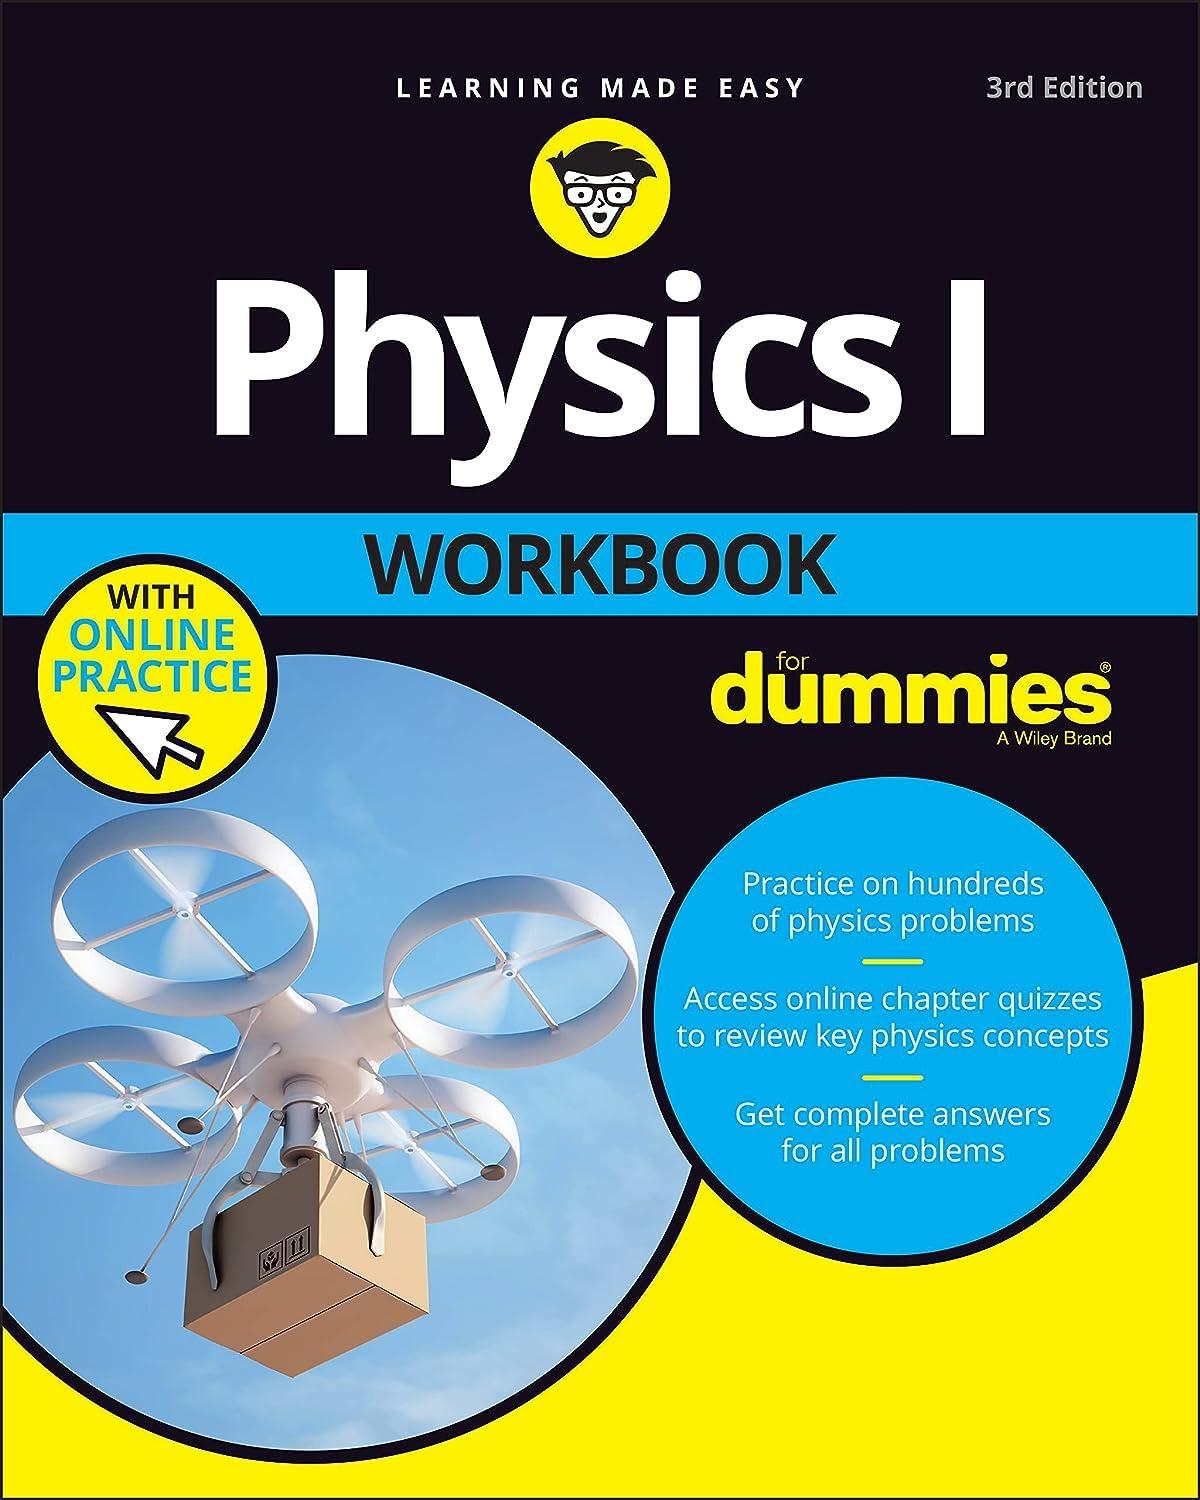 physics i workbook for dummies with online practice 3rd edition consumer dummies 1119716470, 978-1119716471